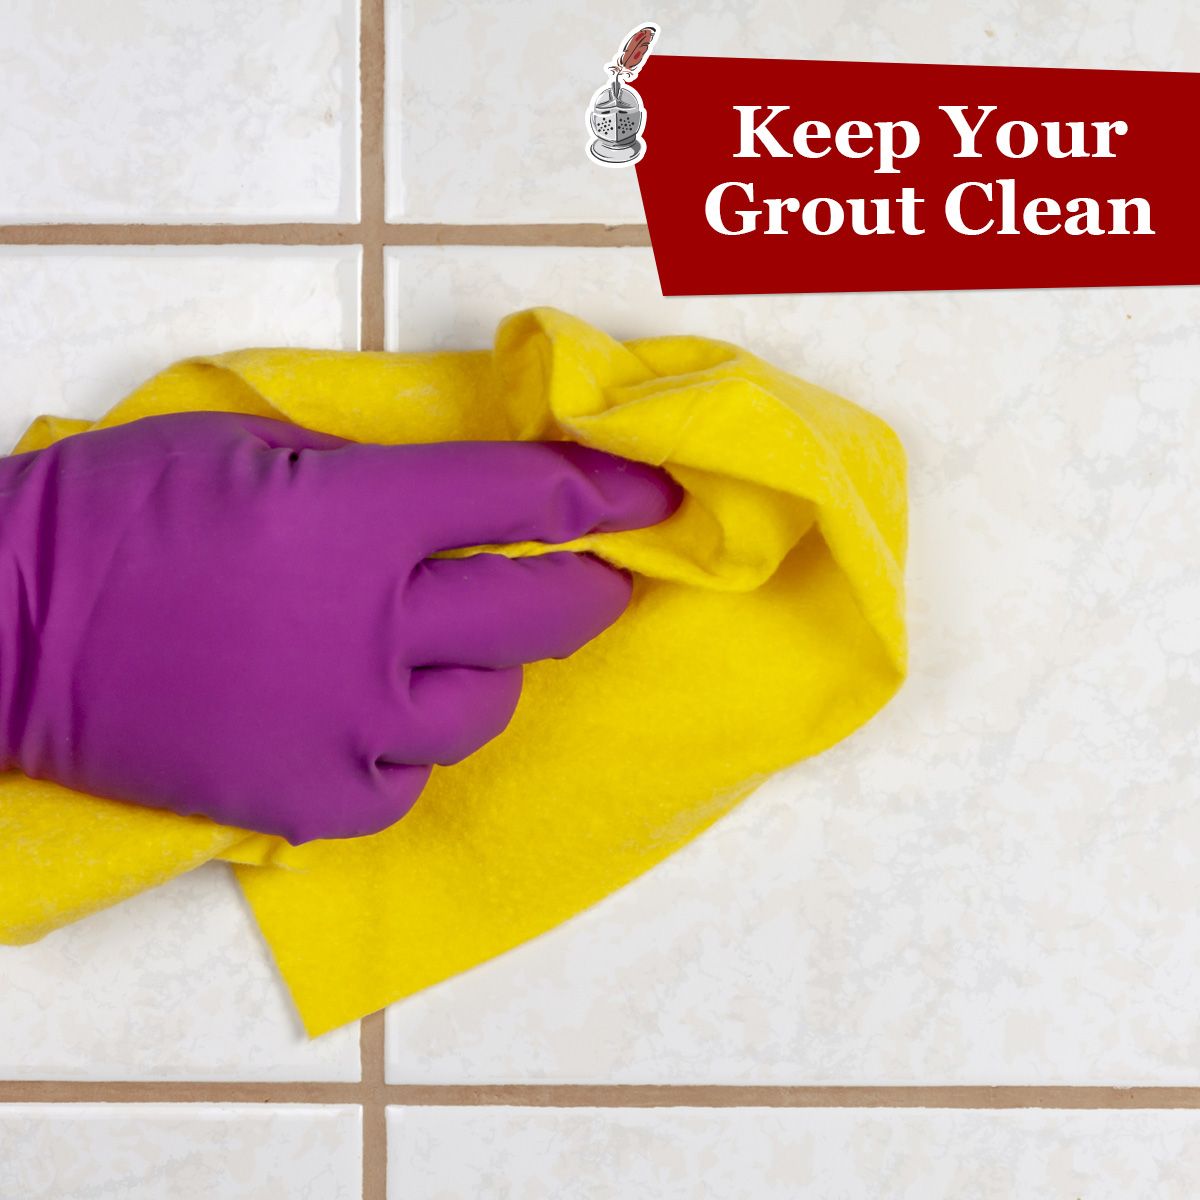 Keep Your Grout Clean